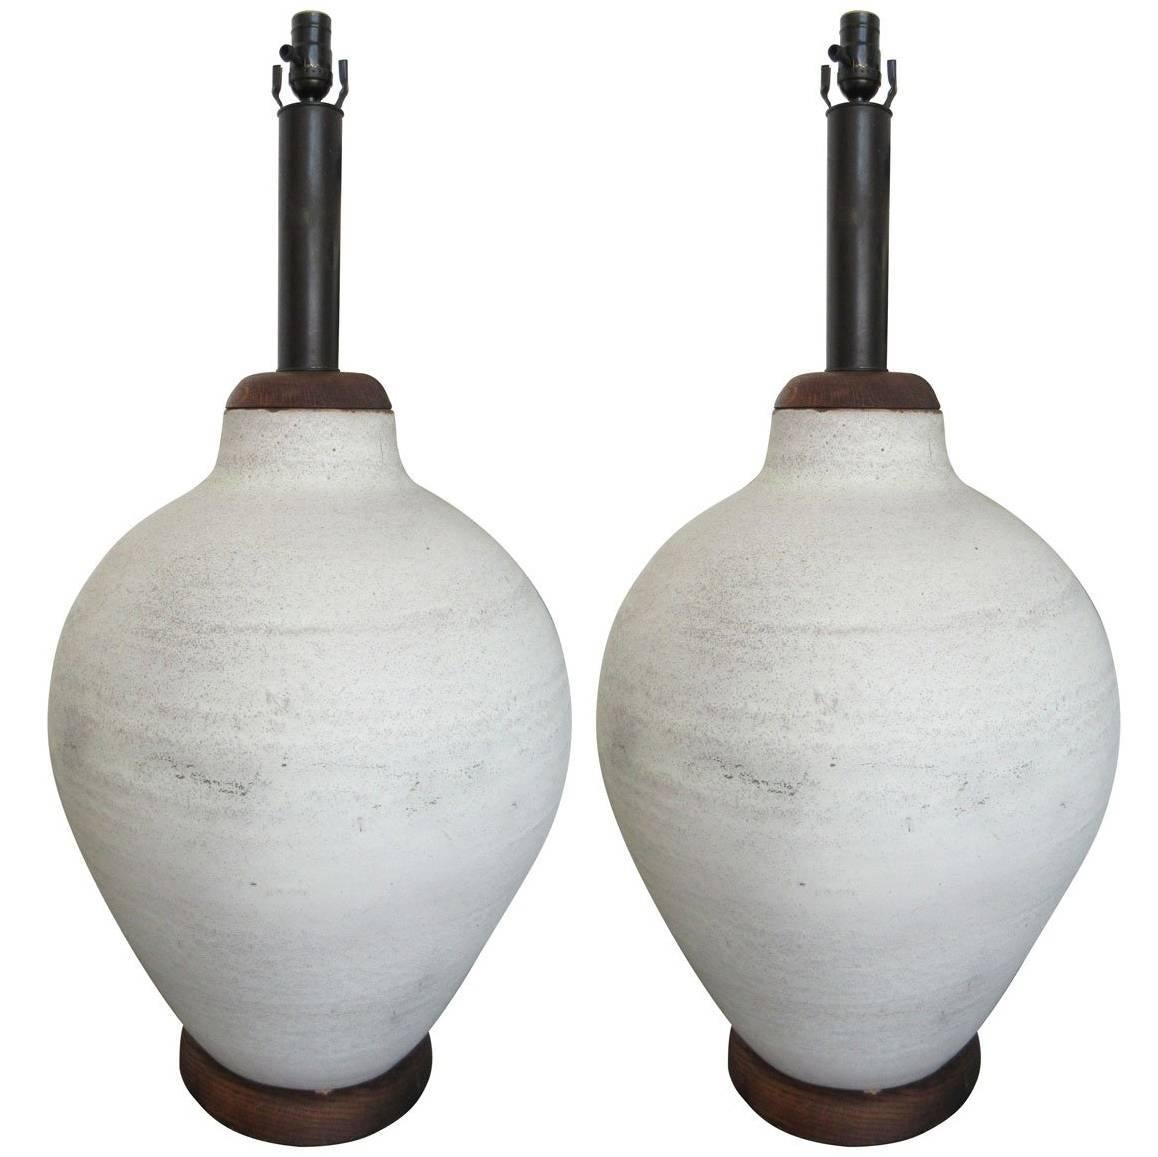 Pair of Gigantic Mid-Century Modern Pottery Lamps